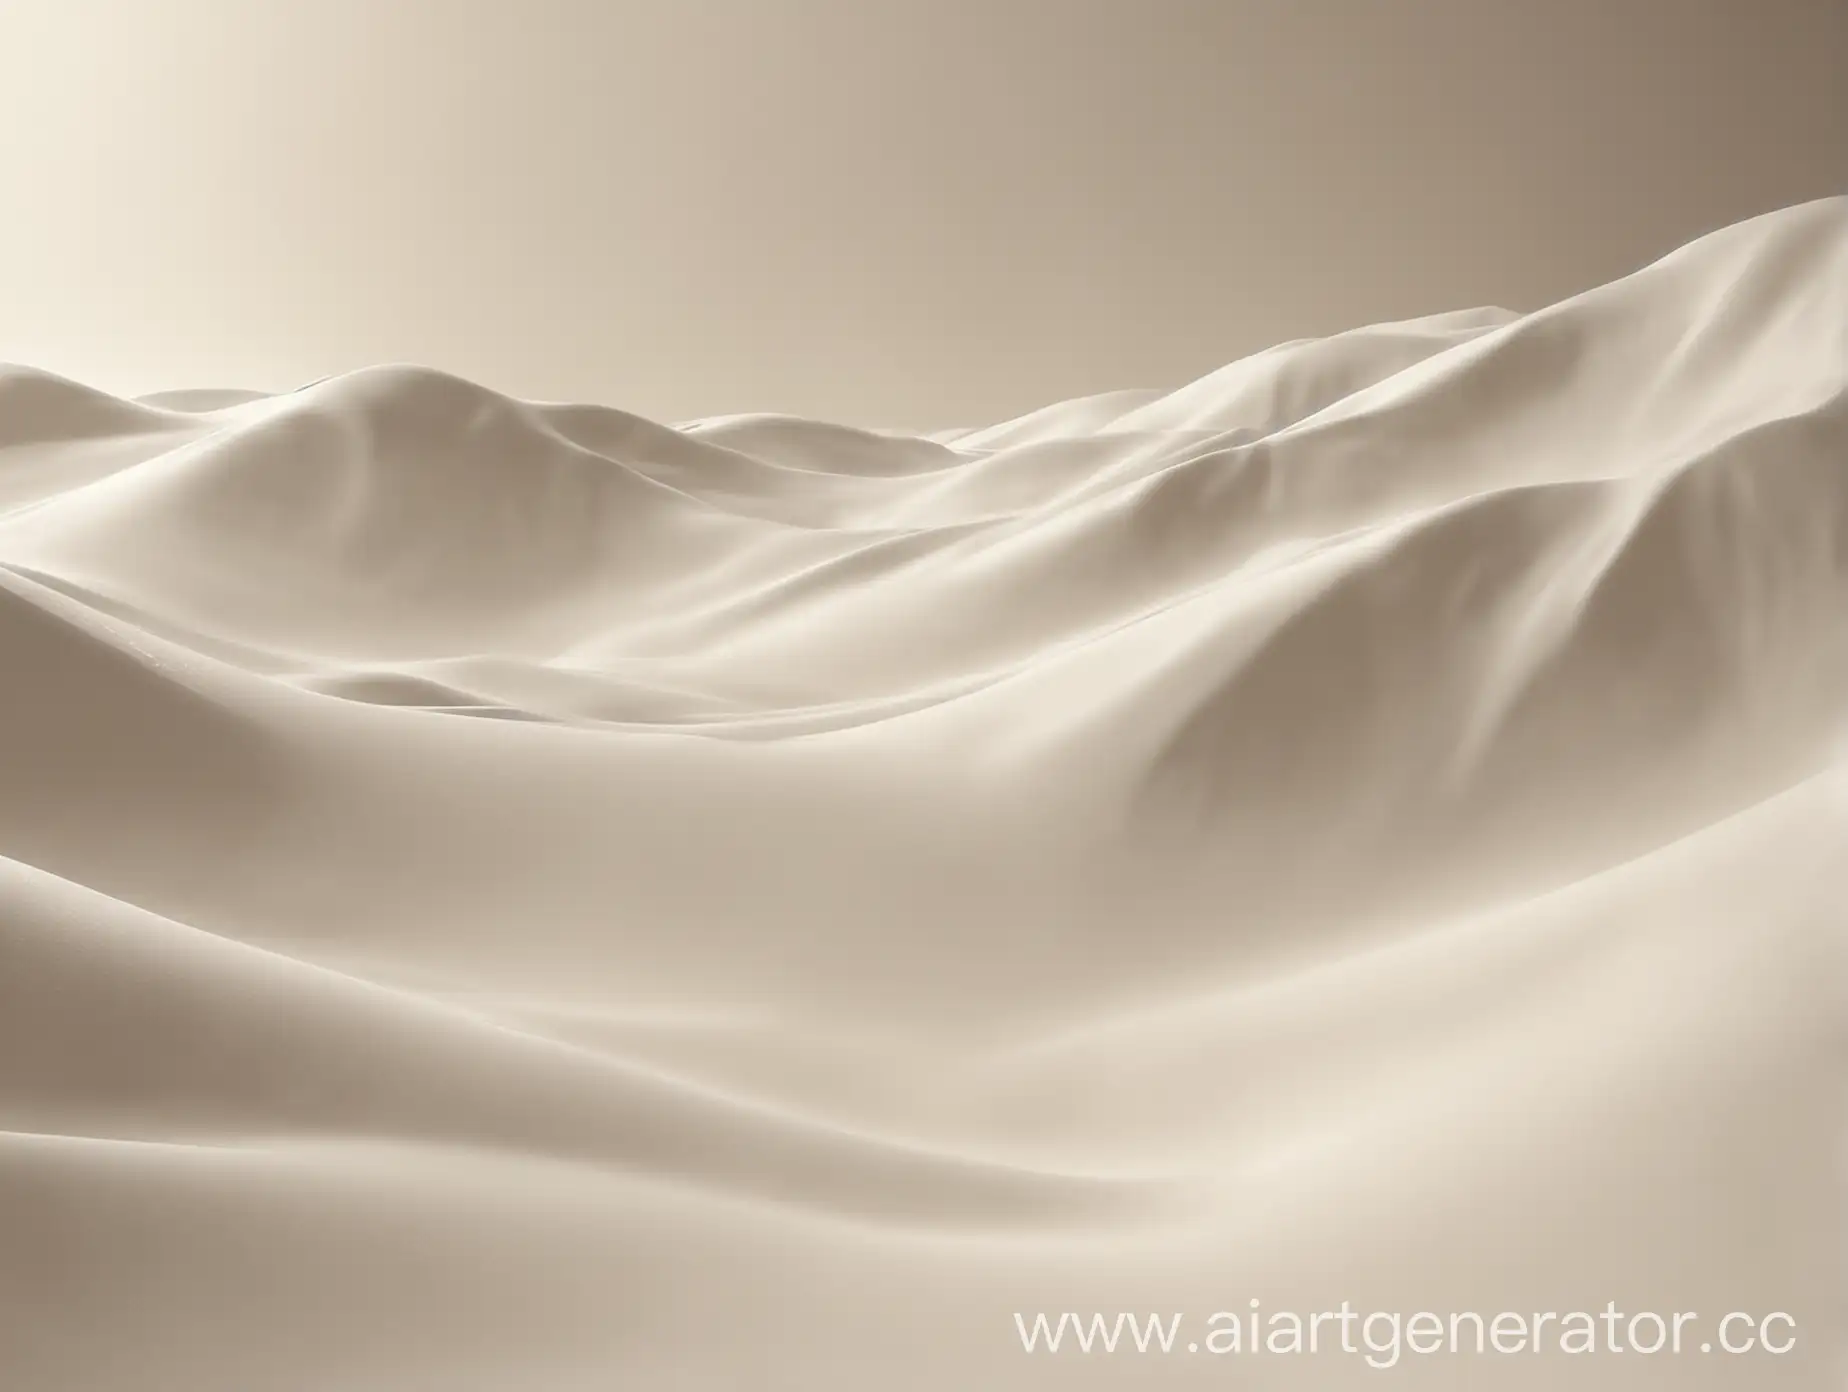 Smooth-Monochromatic-Hilly-Surface-Background-in-Milk-Tones